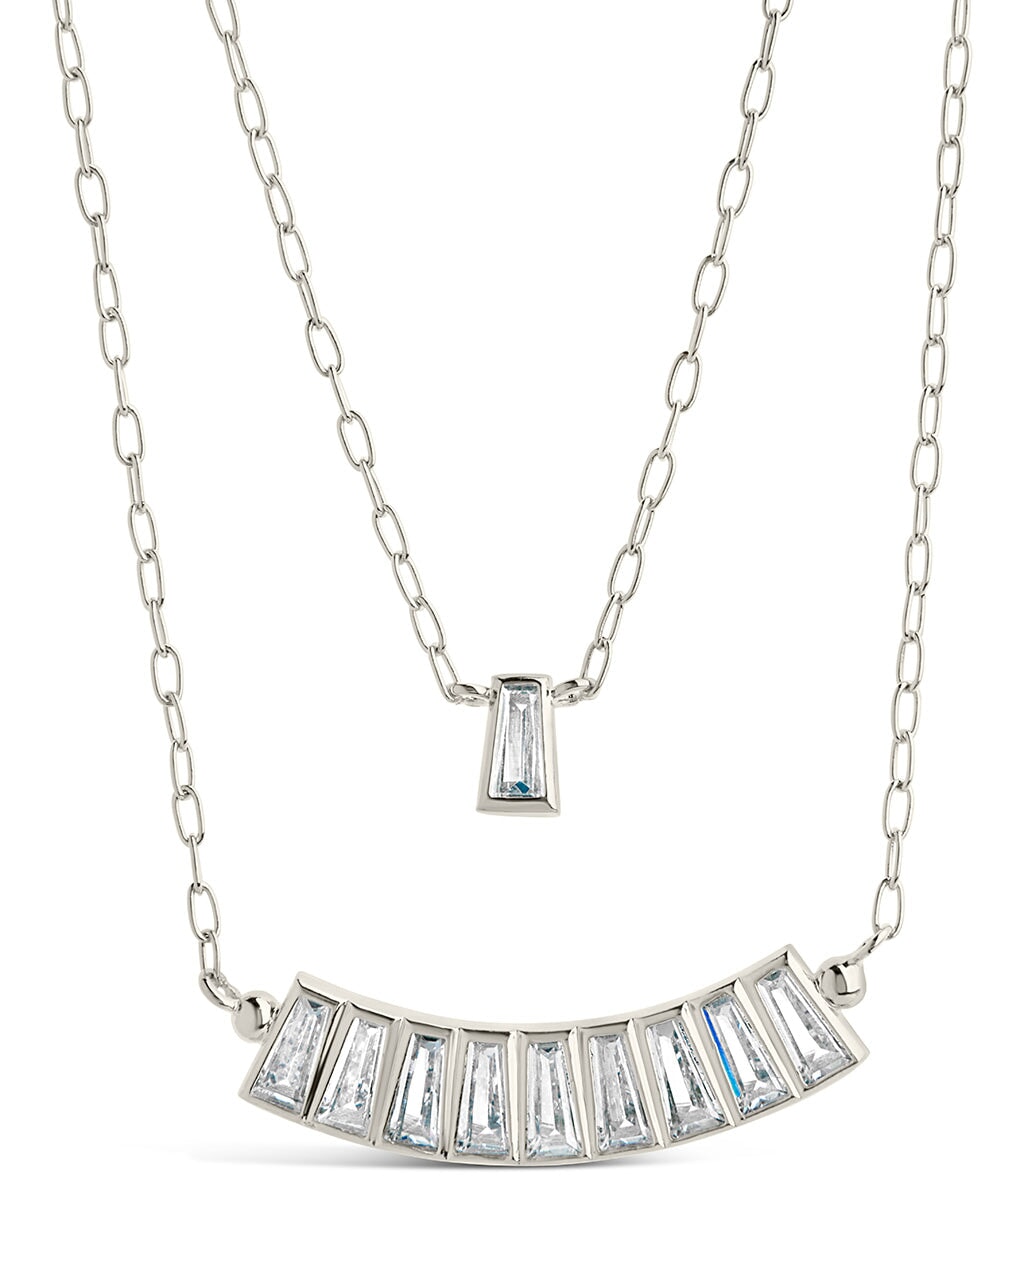 Lillian Layered Necklace Necklace Sterling Forever Silver 